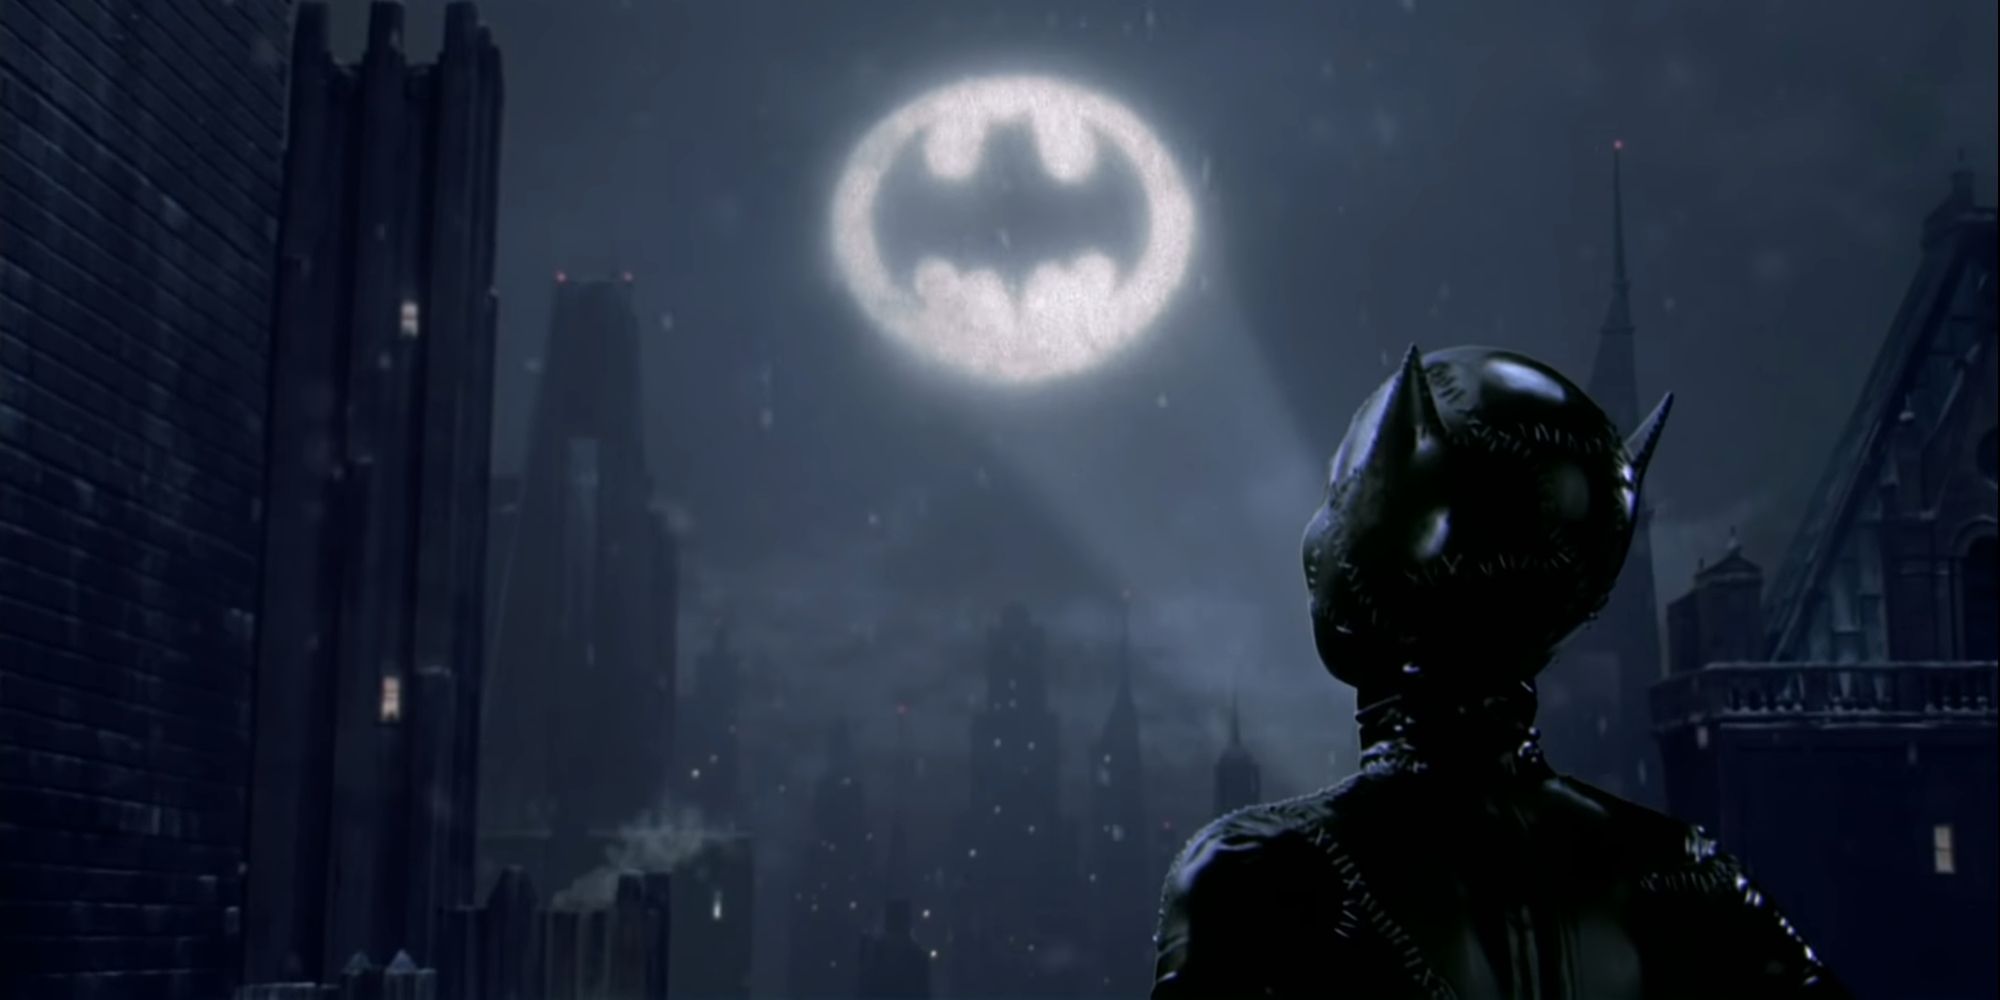 Selina Kyle AKA Catwoman gazing up at the Bat-Signal in the sky in Batman Returns (1992)